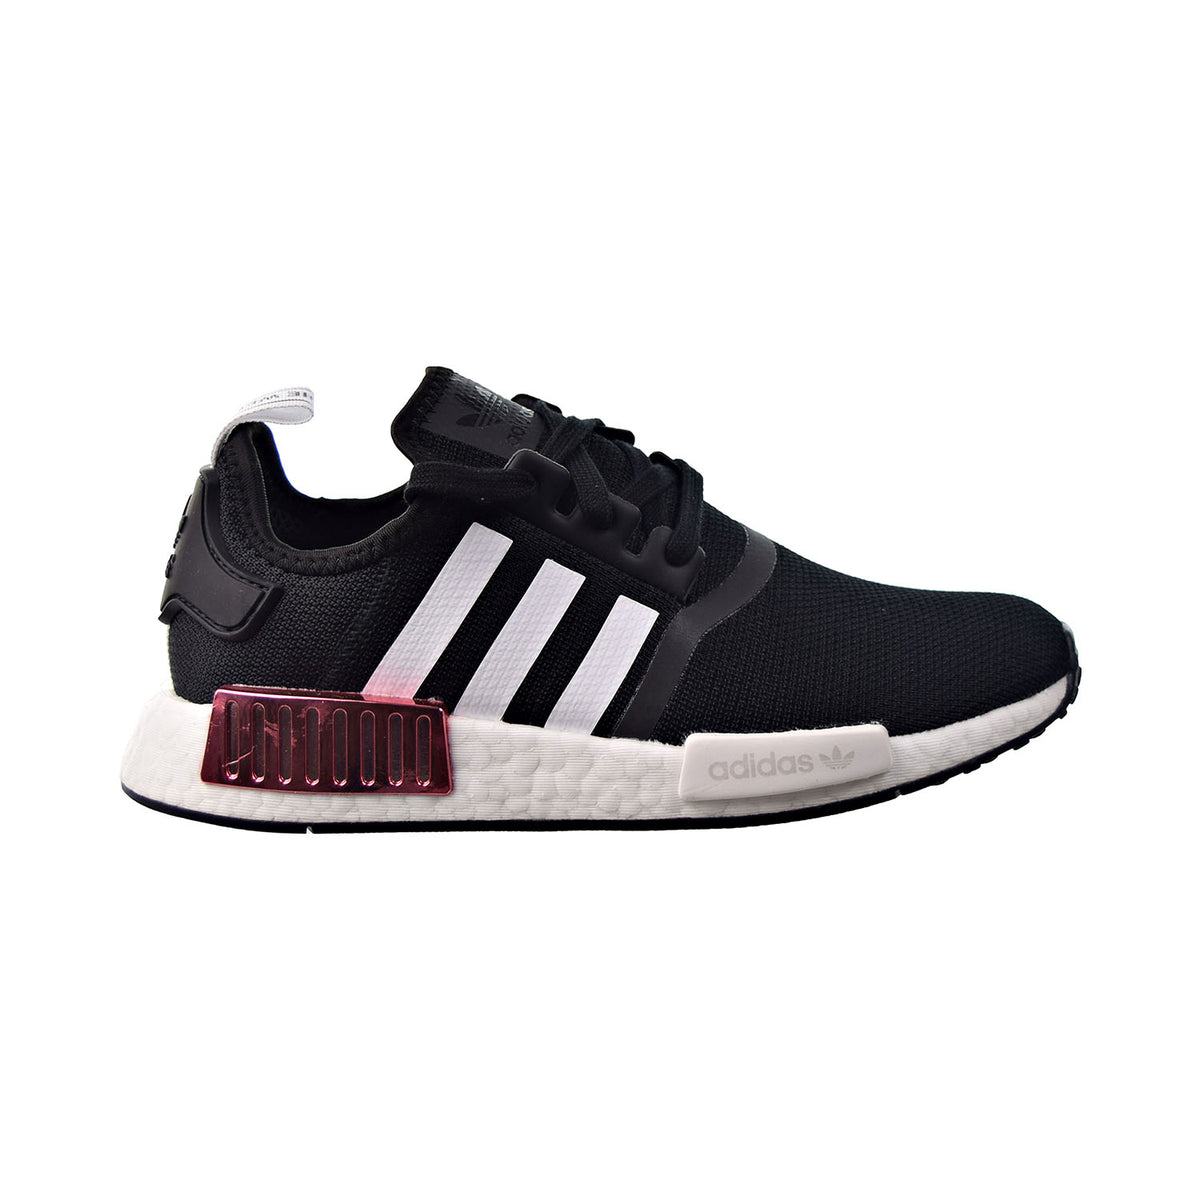 Adidas NMD R1 Shoes Black-White-Pink